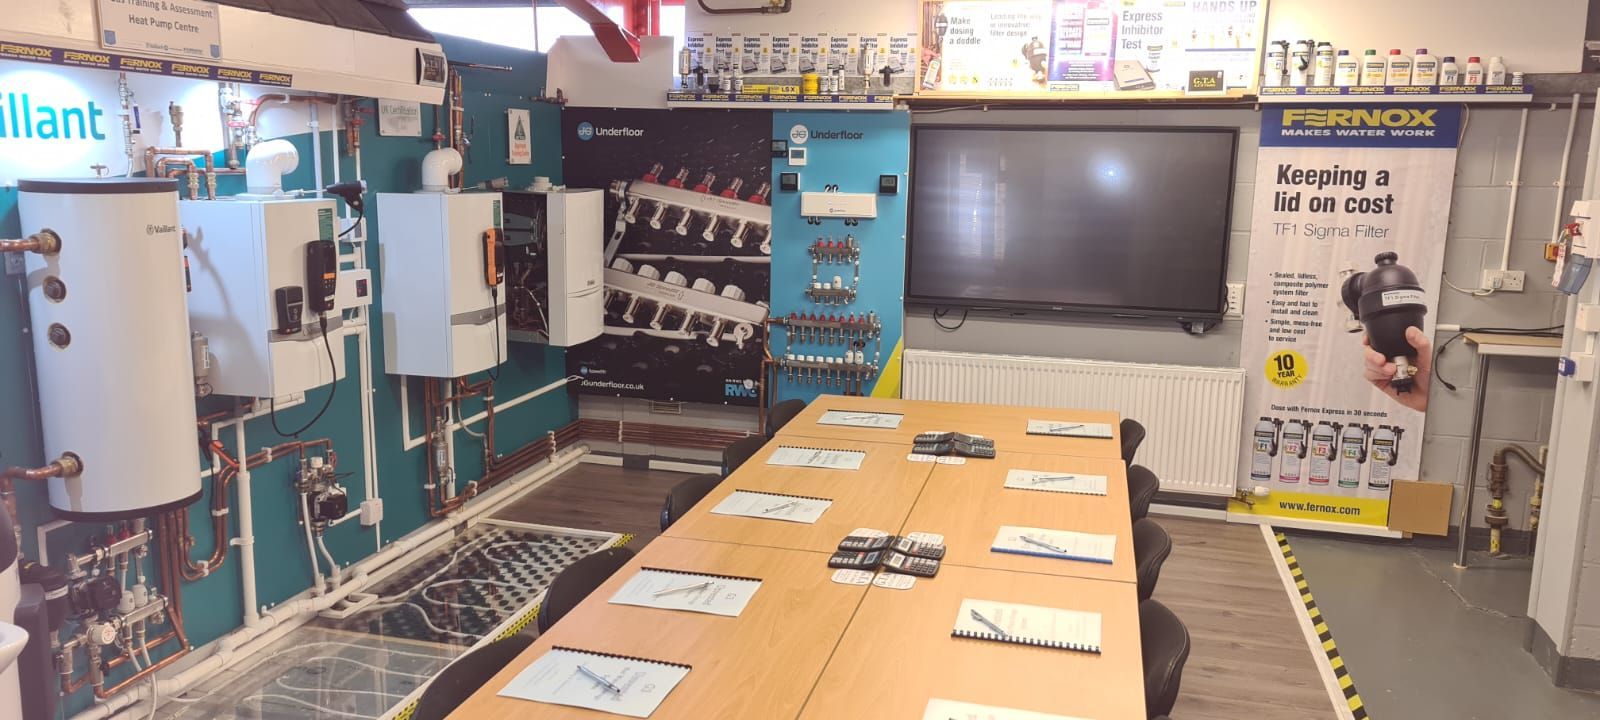 electric training courses in Basildon Essex by Gas Training and Assessment qualified electricians